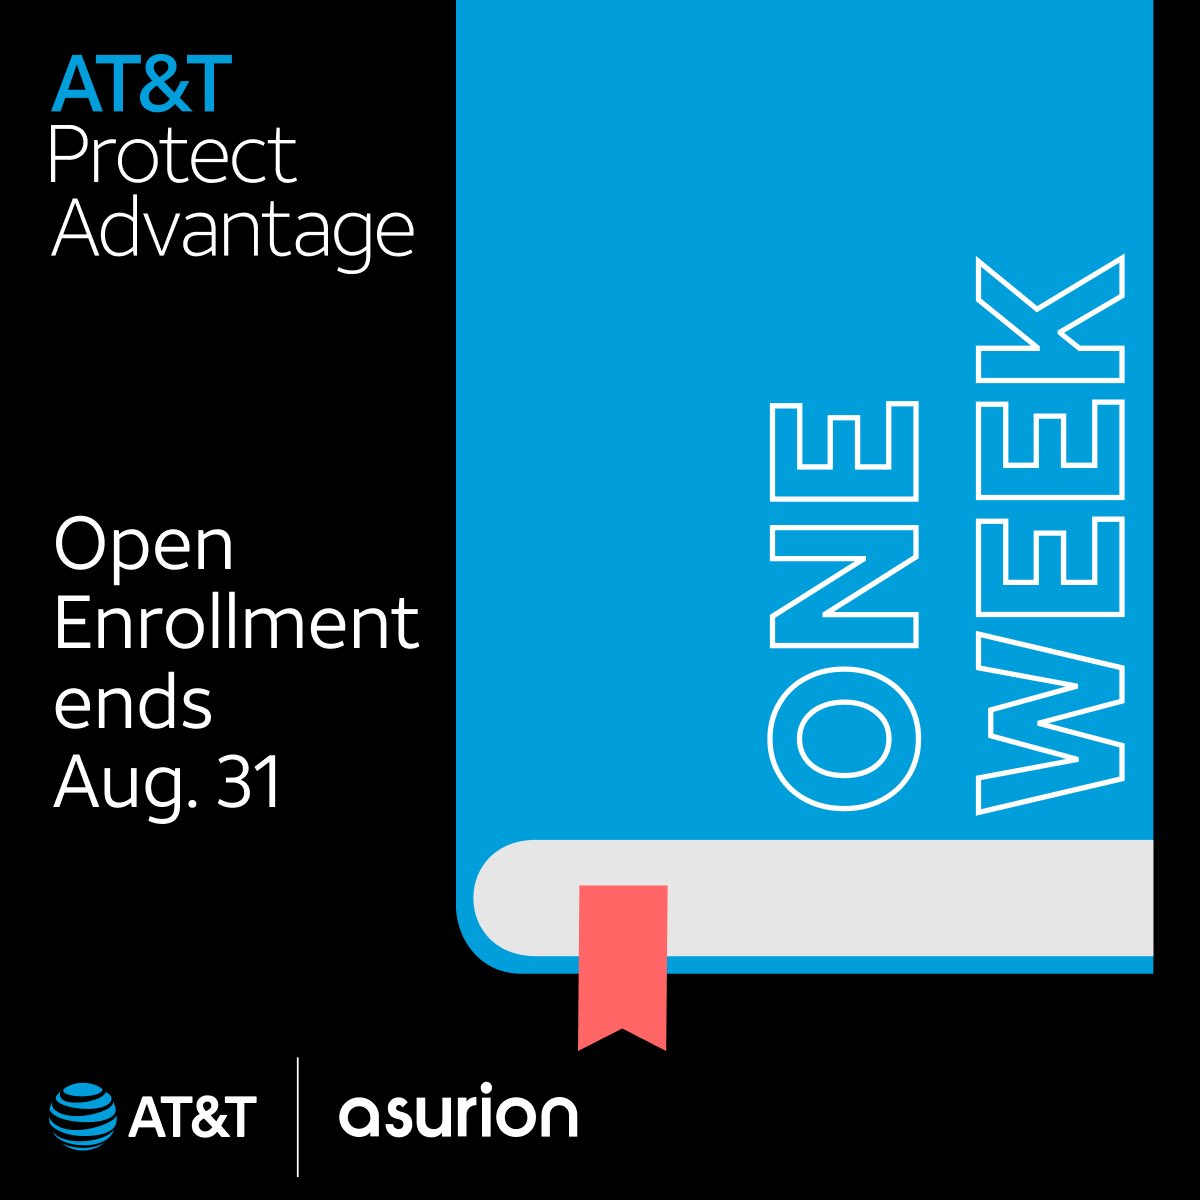 School is about to start and Open Enrollment is about to end! Make sure students start the school year with Protect Advantage! One more week! Let’s get it! #DontGoBrackenMyPhone #ProtectAdvantage #wiNEverything @TheRealOurNE @emilywiper @firas_smadi @pnixnix @LillardDerick